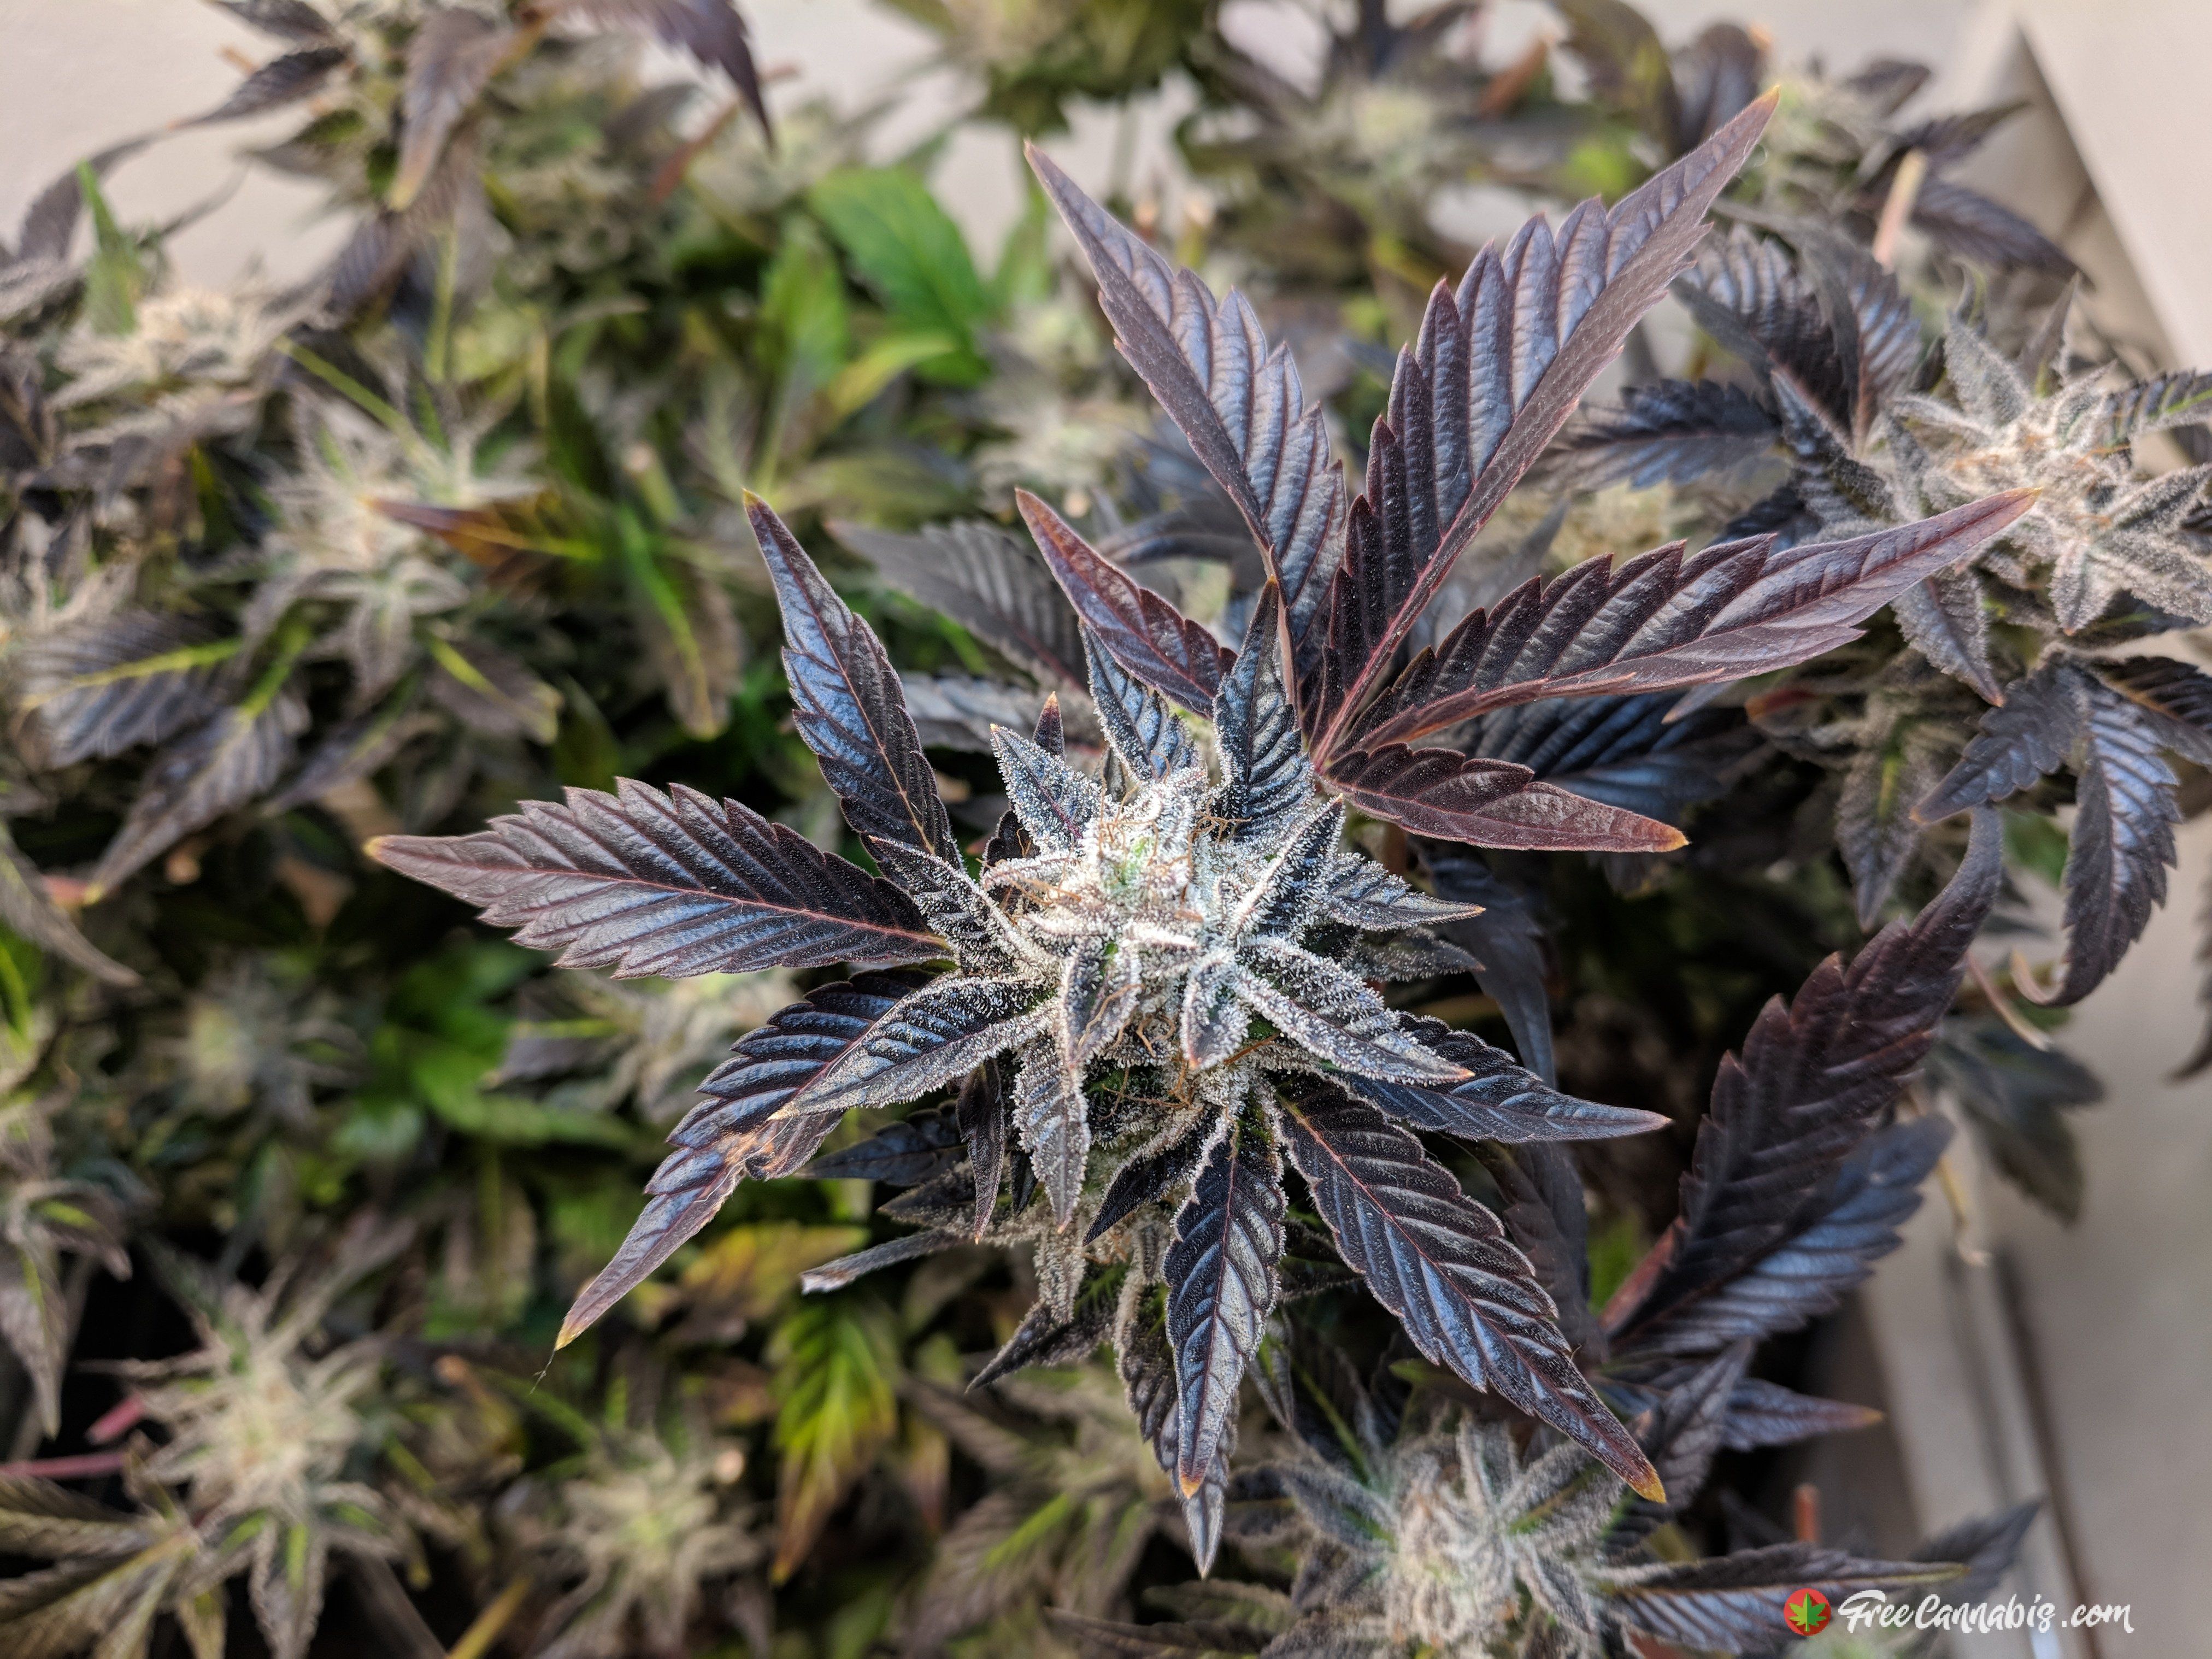 Second phase harvest of lower buds